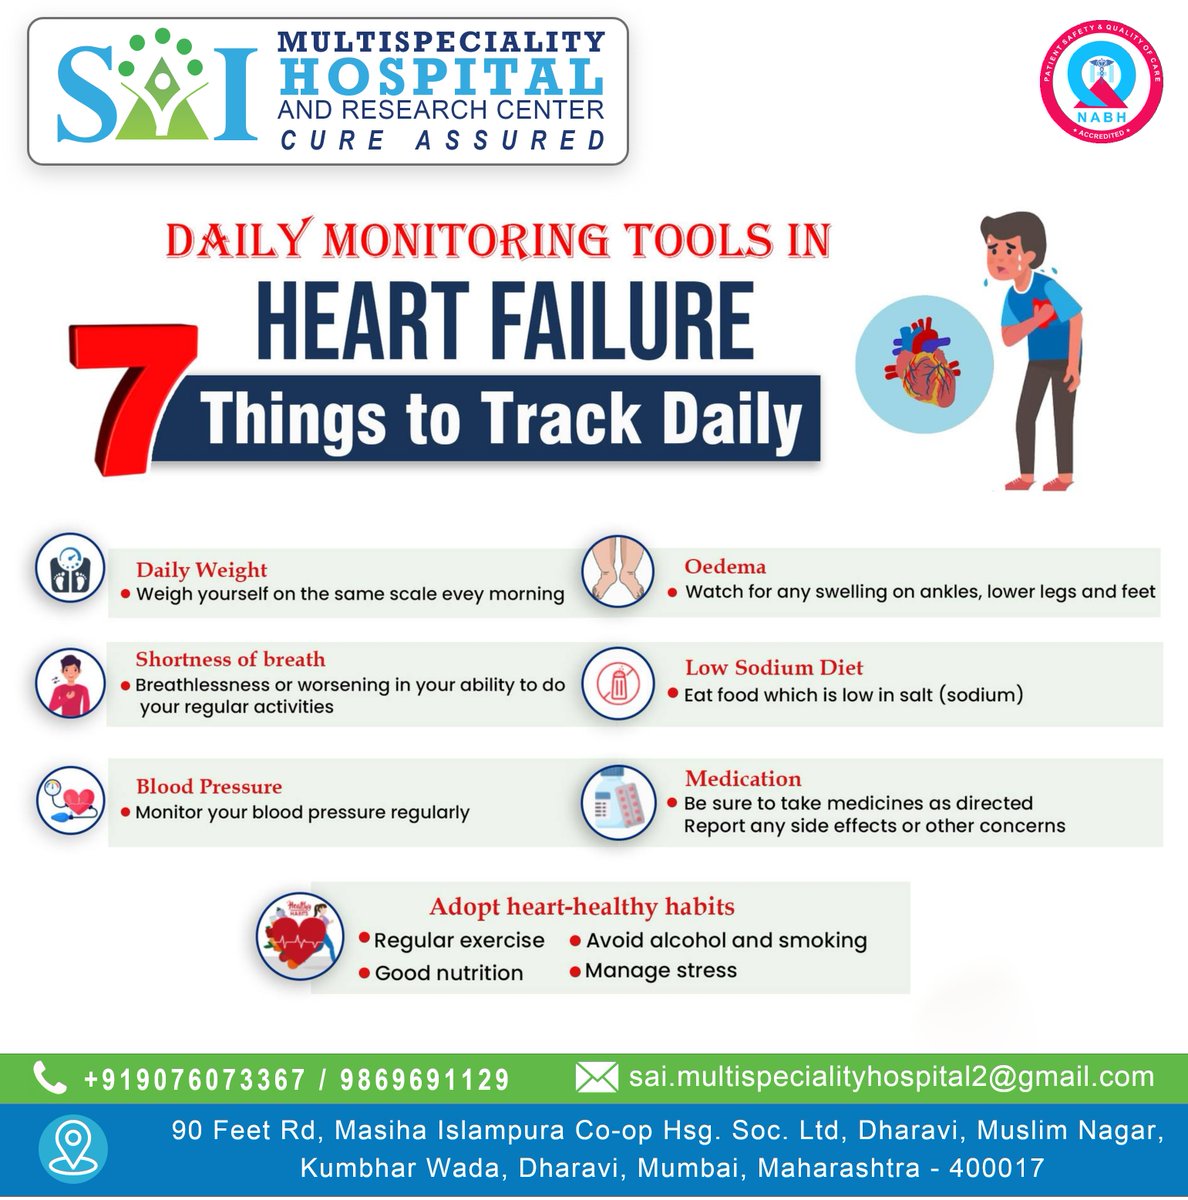 DAILY MONITORING TOOLS IN HEART FAILURE 7Things to Track Daily Sai Multispeciality Hospital ResearchCentre +919076073367 / 9869691129